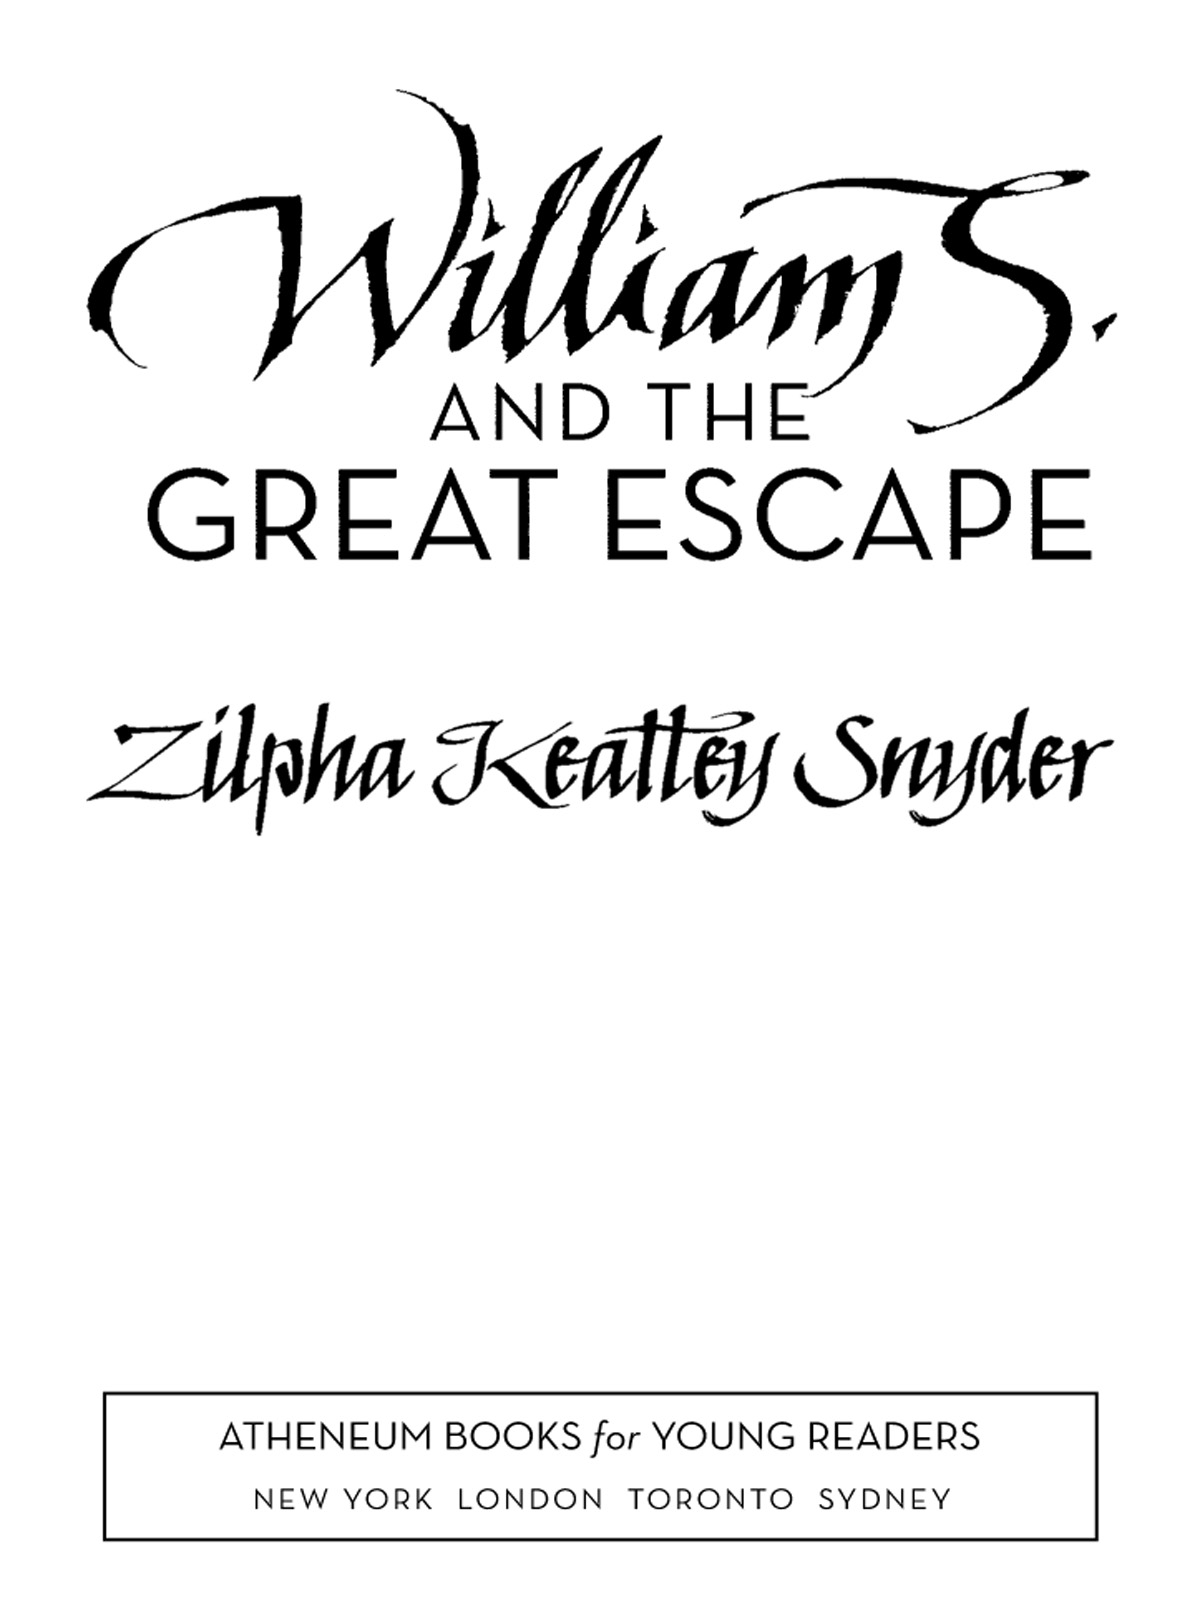 William S. and the Great Escape (2009) by Zilpha Keatley Snyder